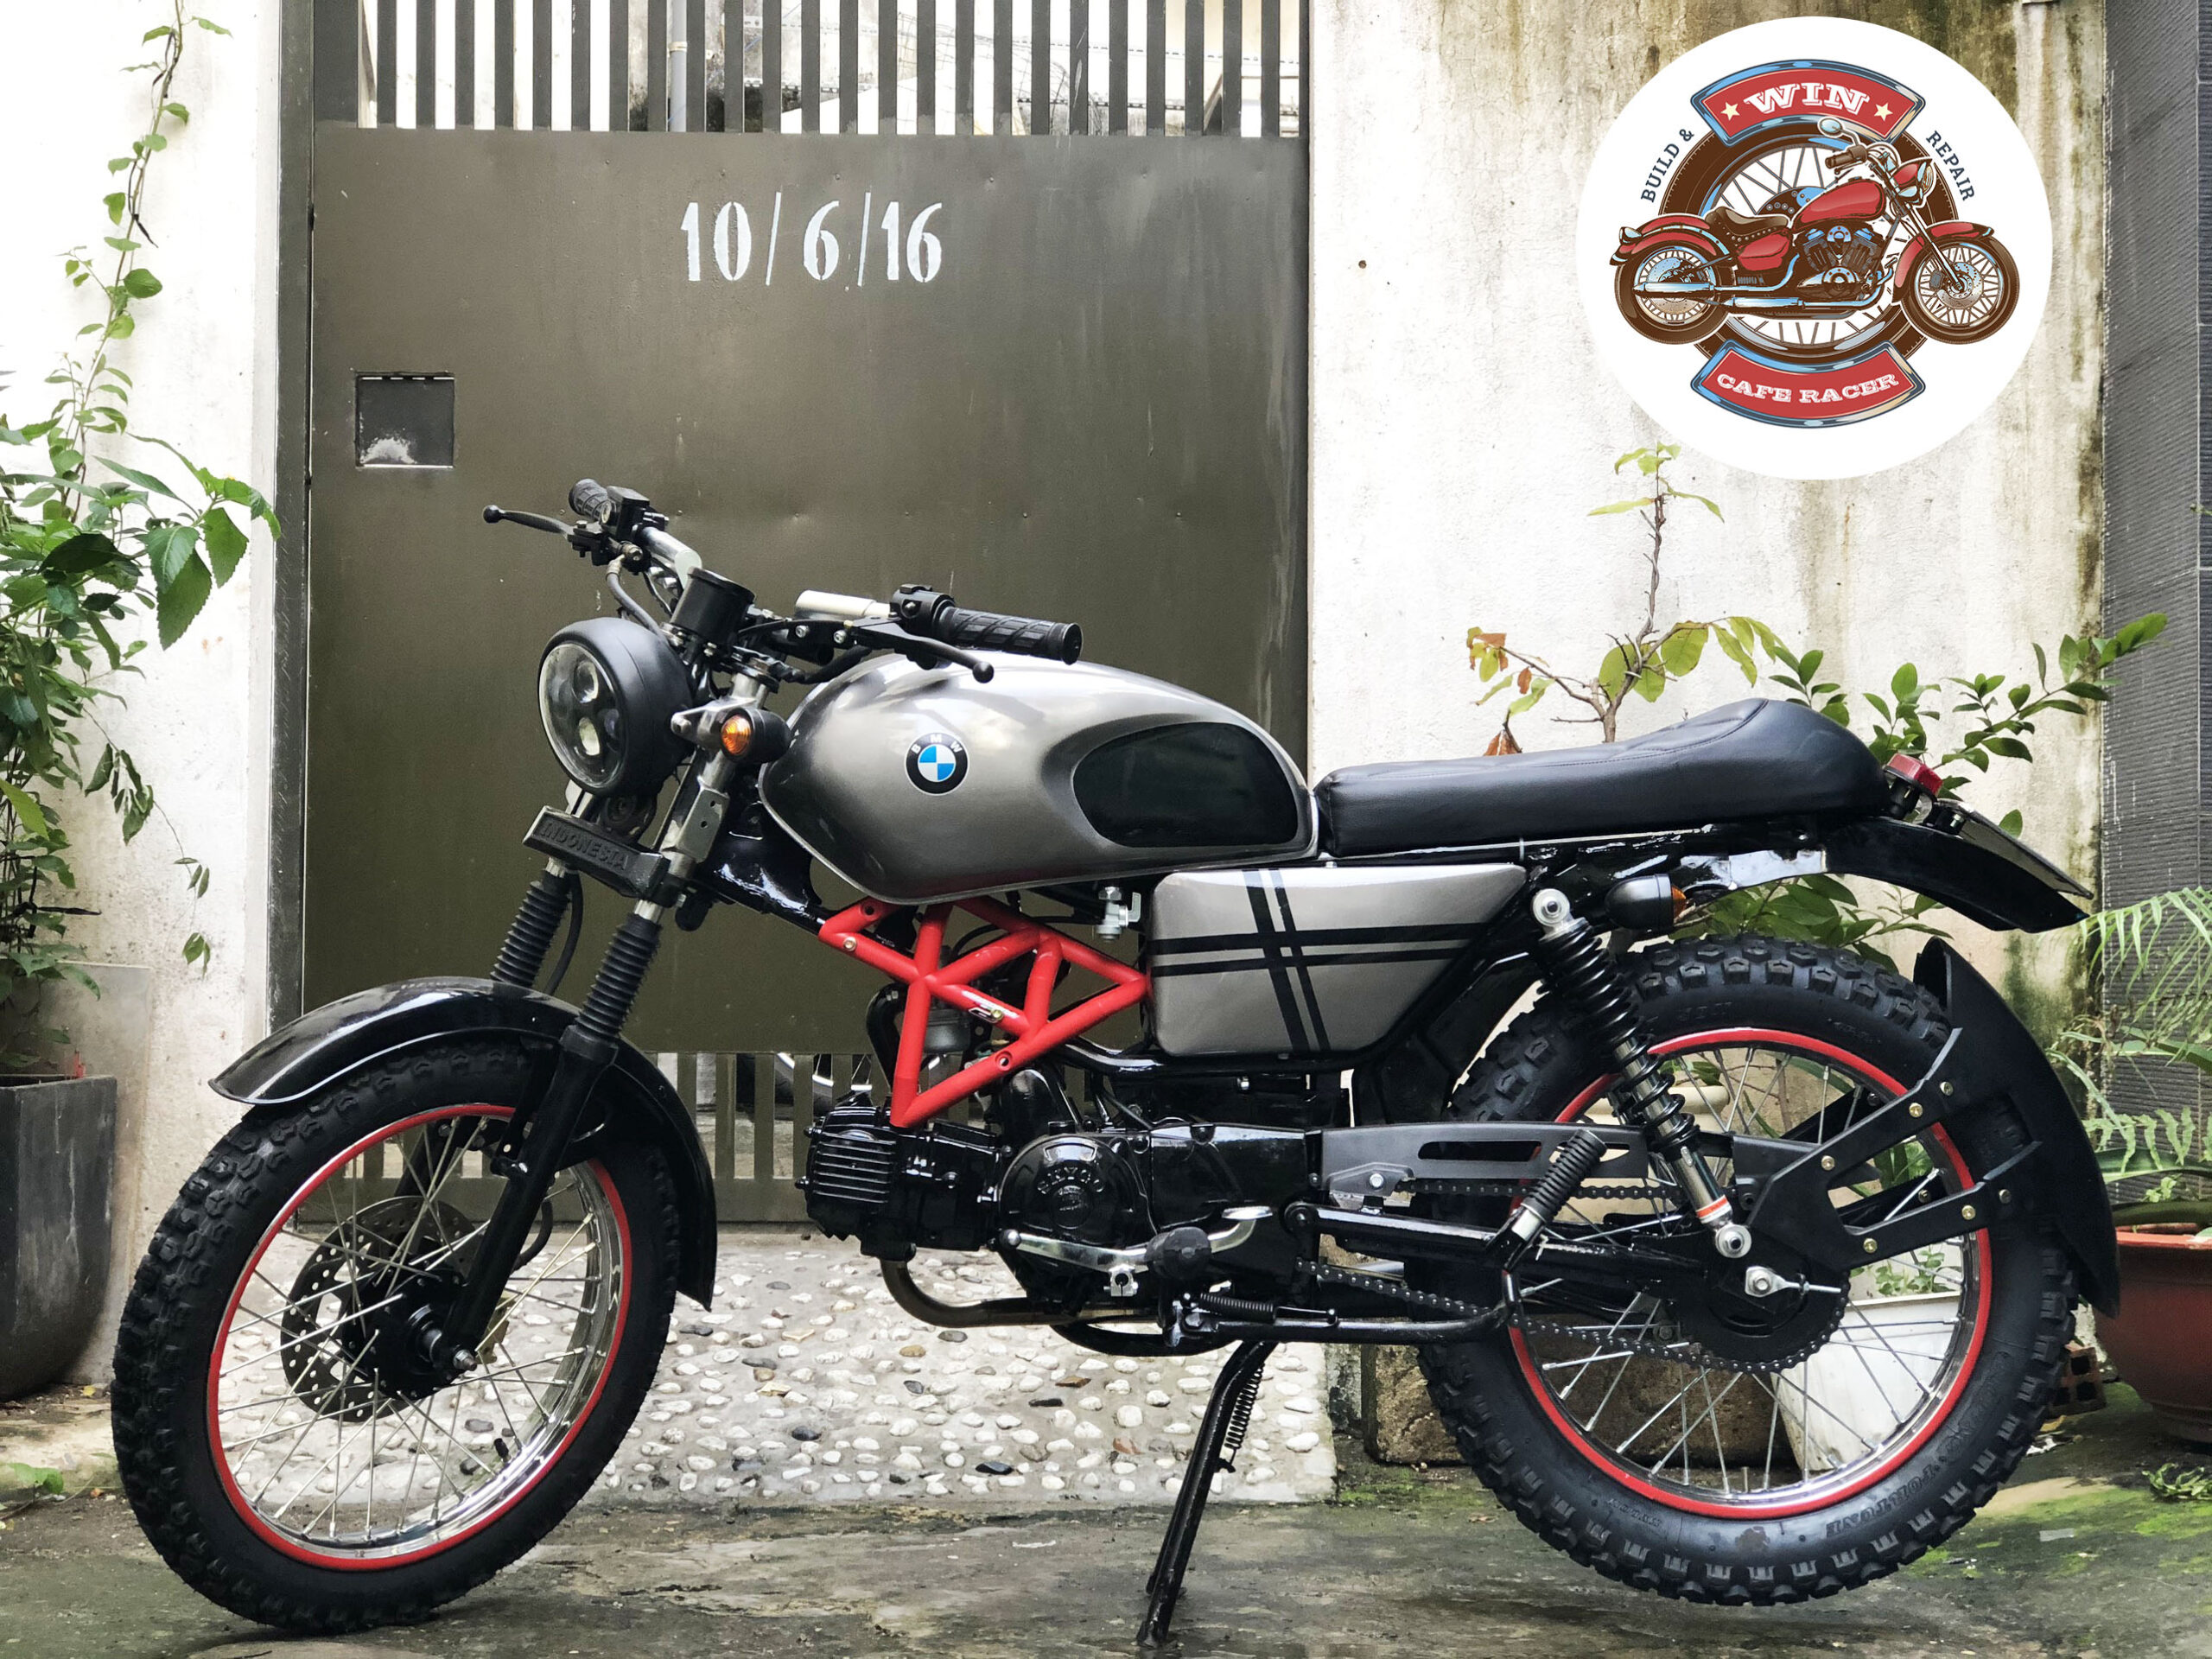 Bán xe Win 100 up cafe racer  chodocucom